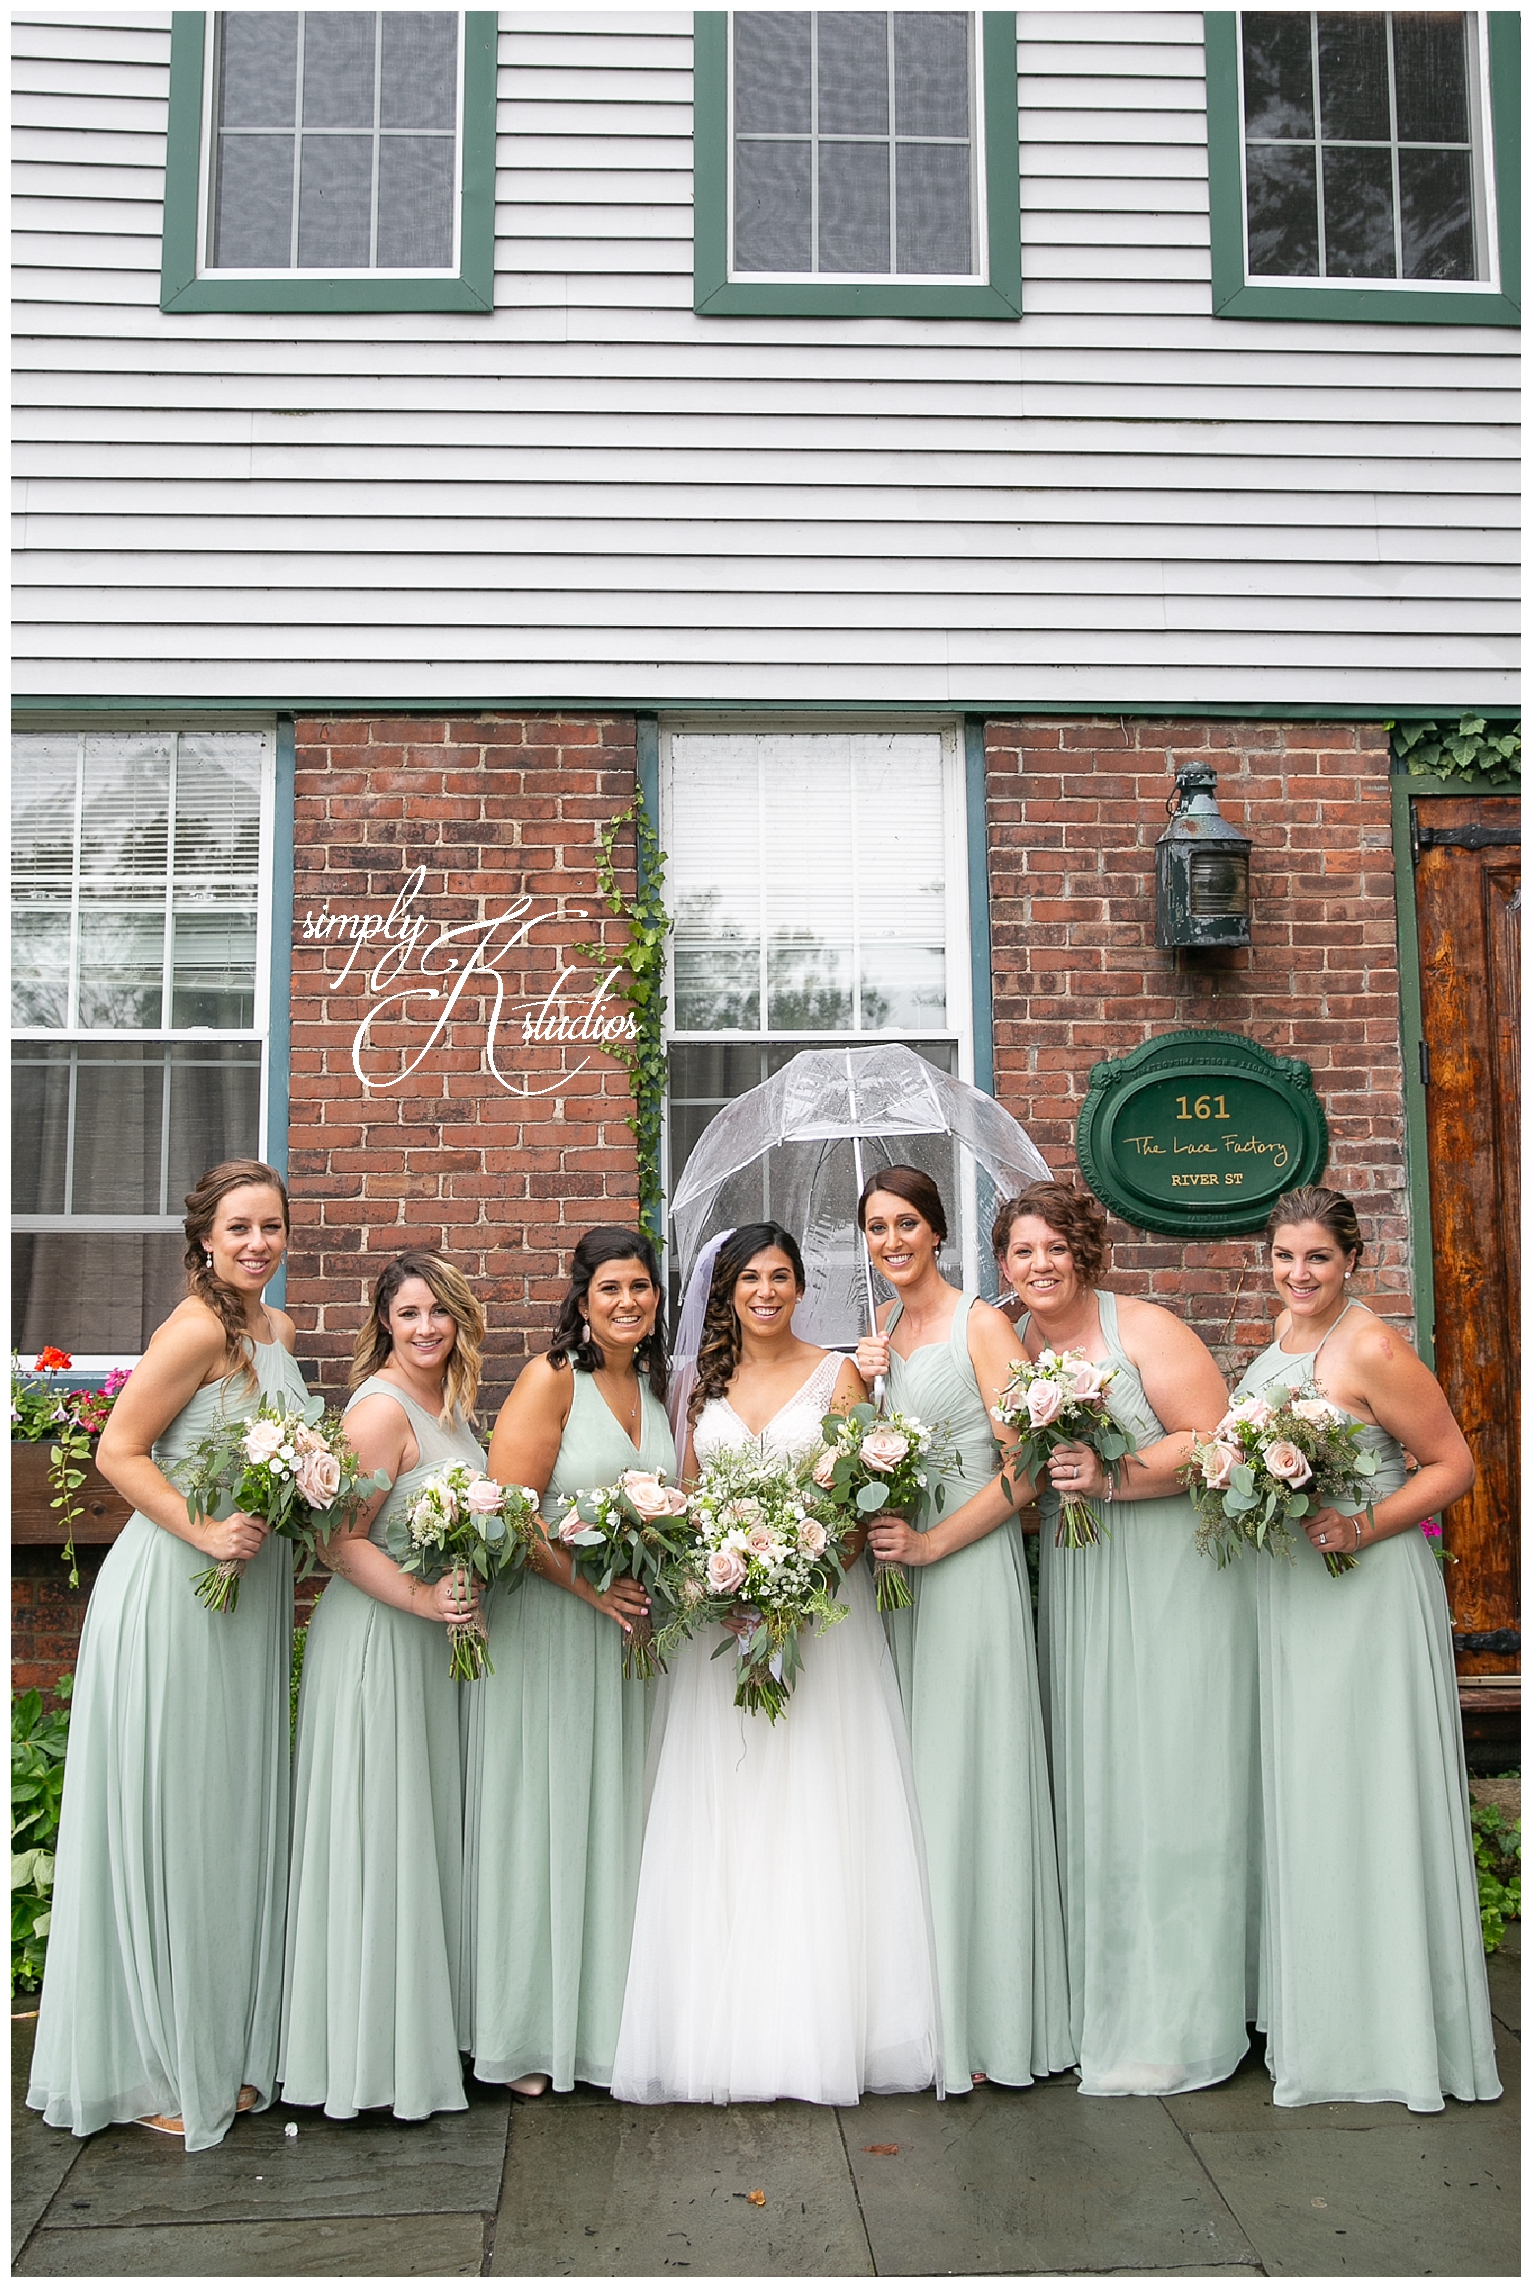 Wedding Photographers at The Lace Factory.jpg